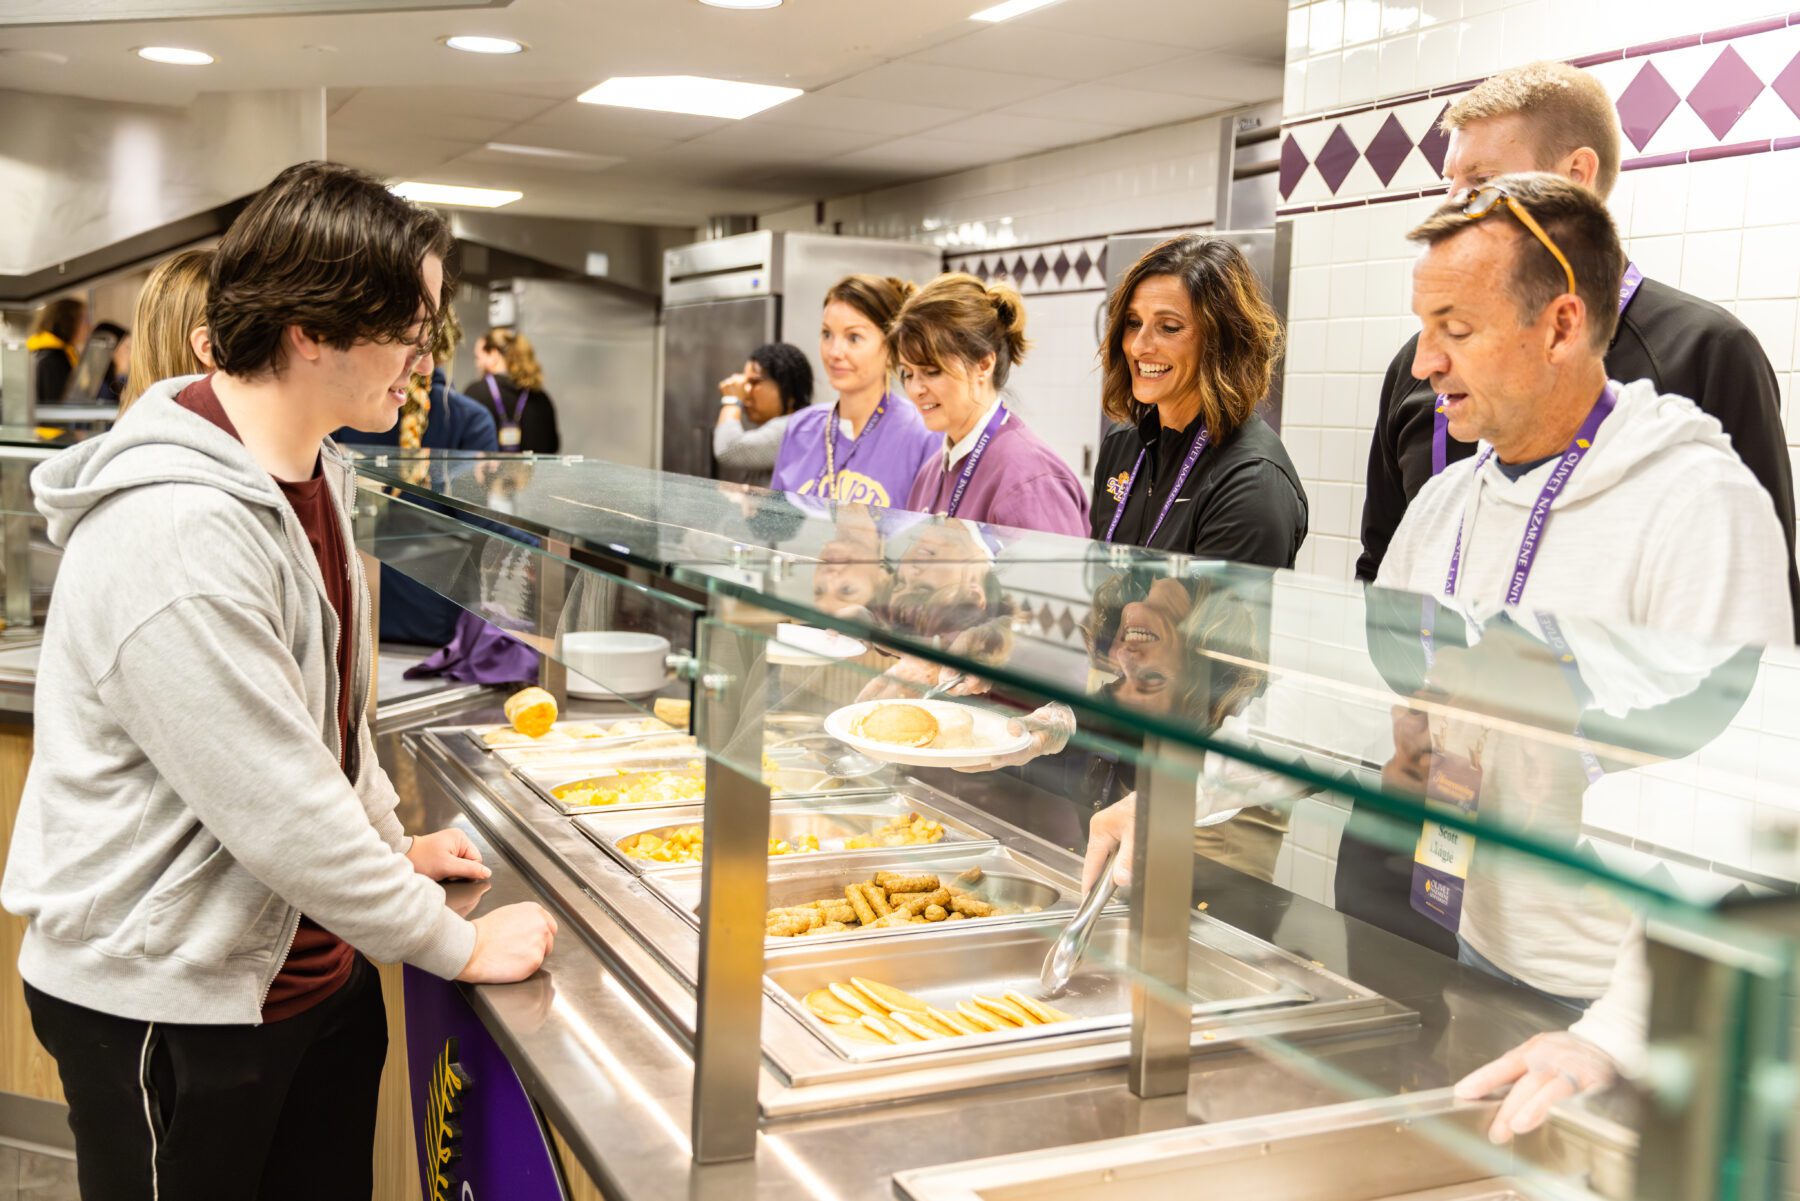 Alumni of Olivet serve the students coming through the line for a late night breakfast.